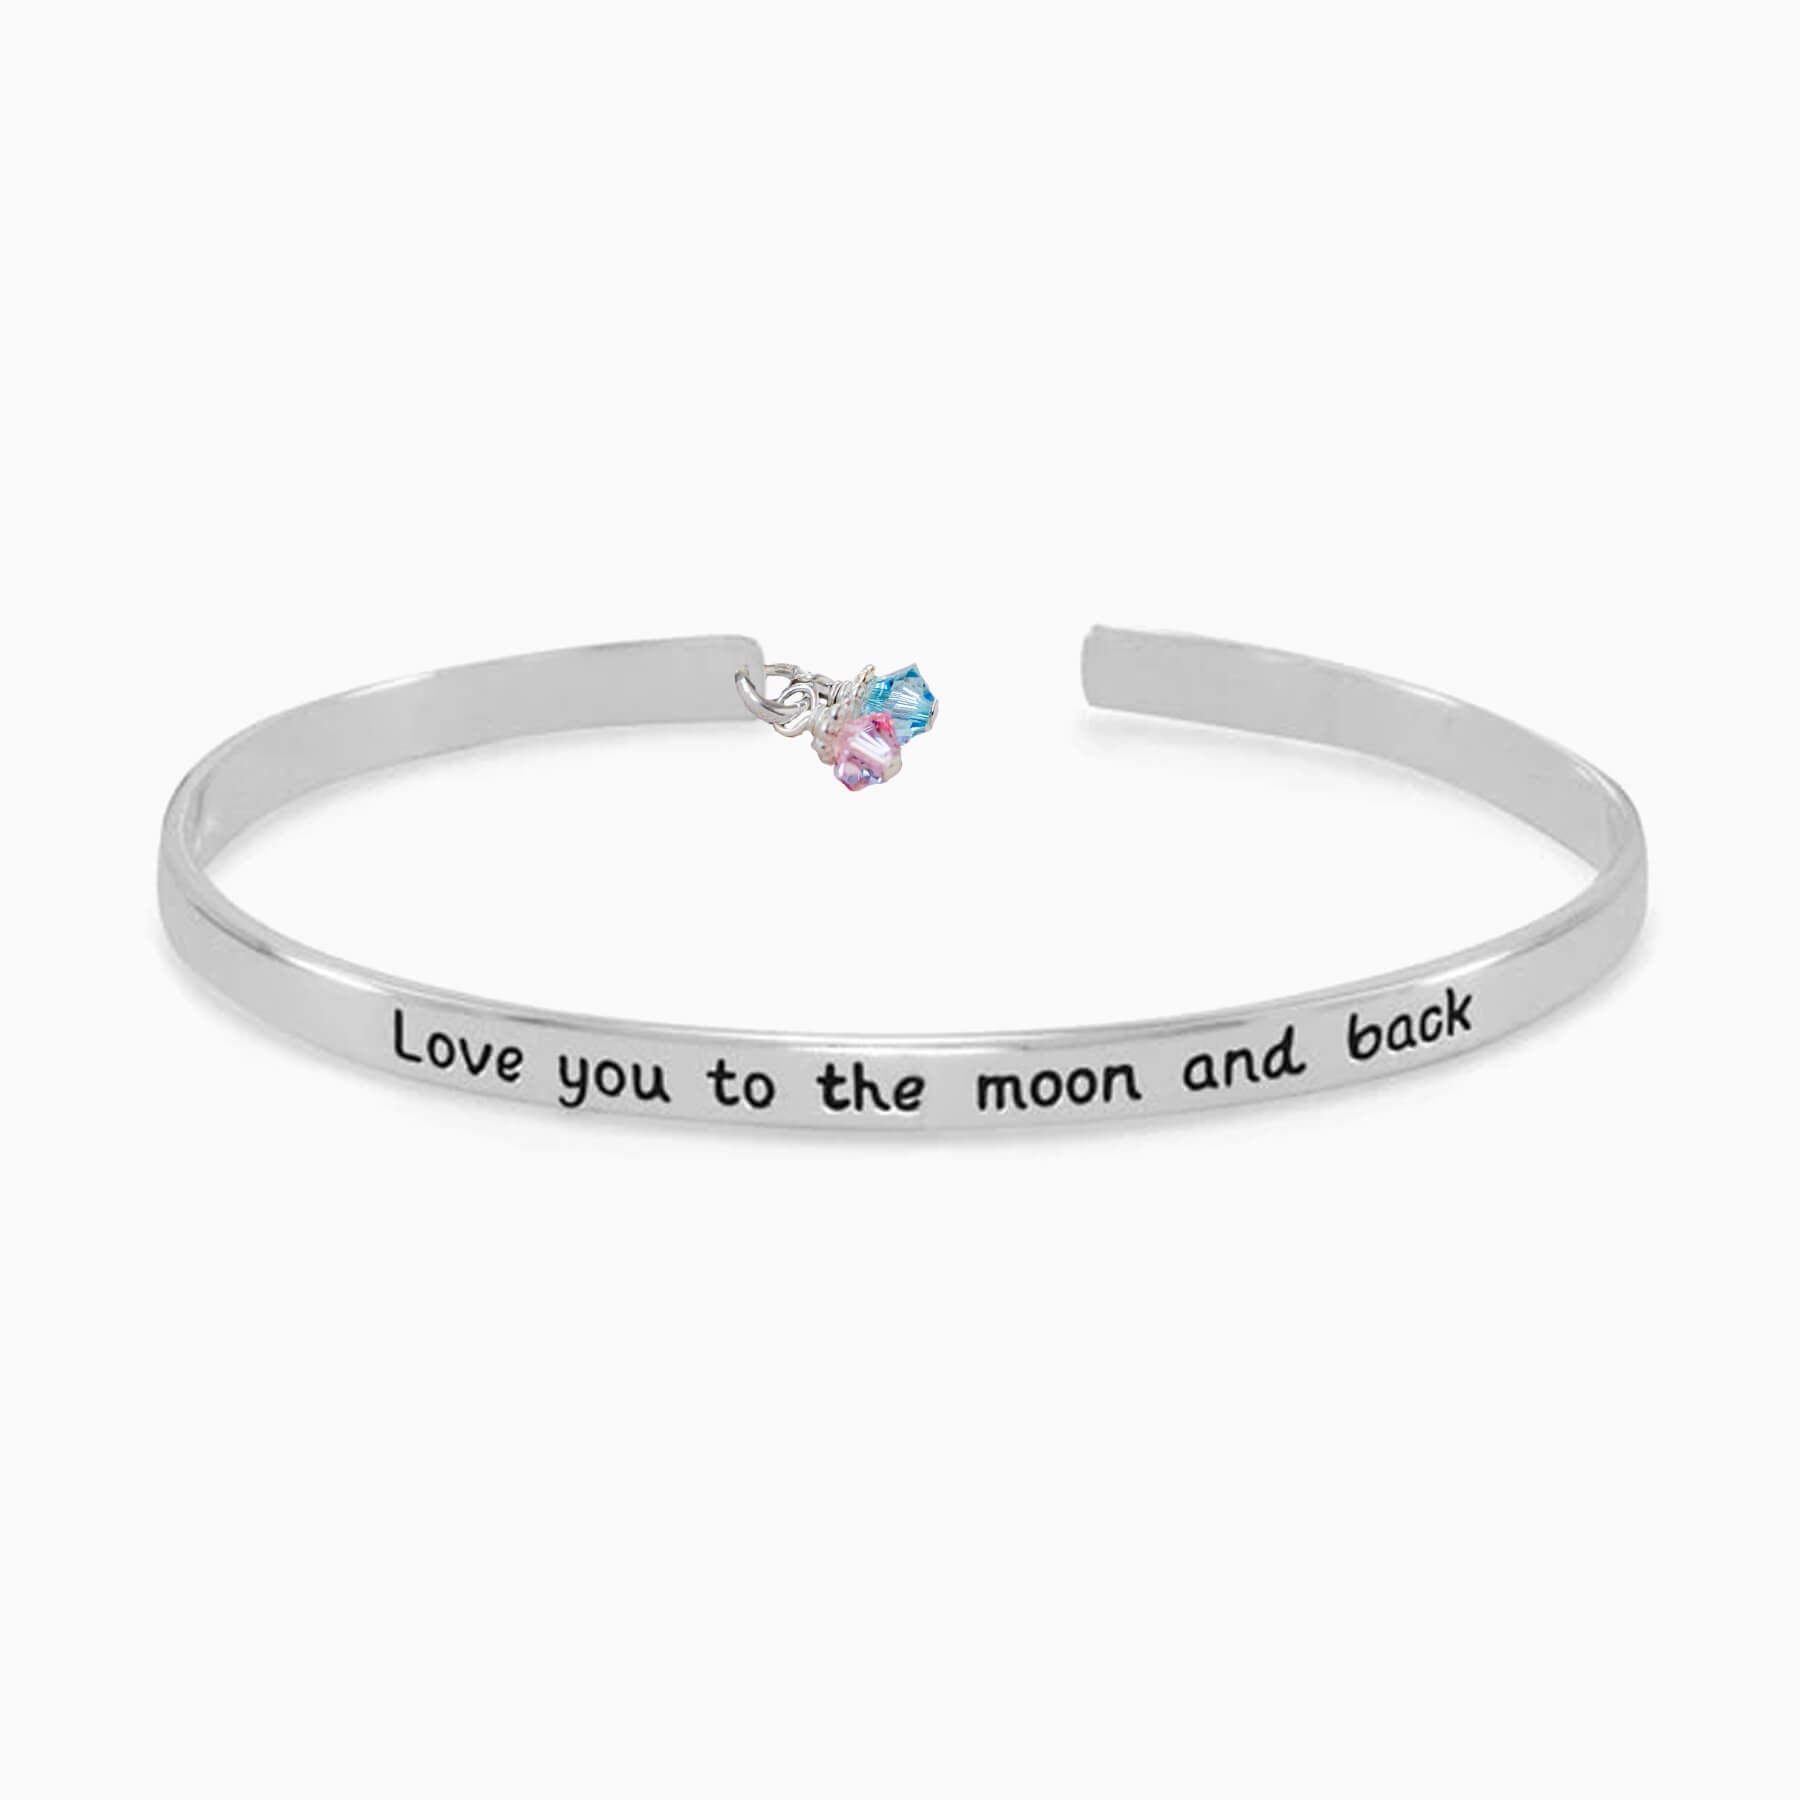 Love You to the Moon and Back Mom Cuff Bracelet - Little Girl's Pearls